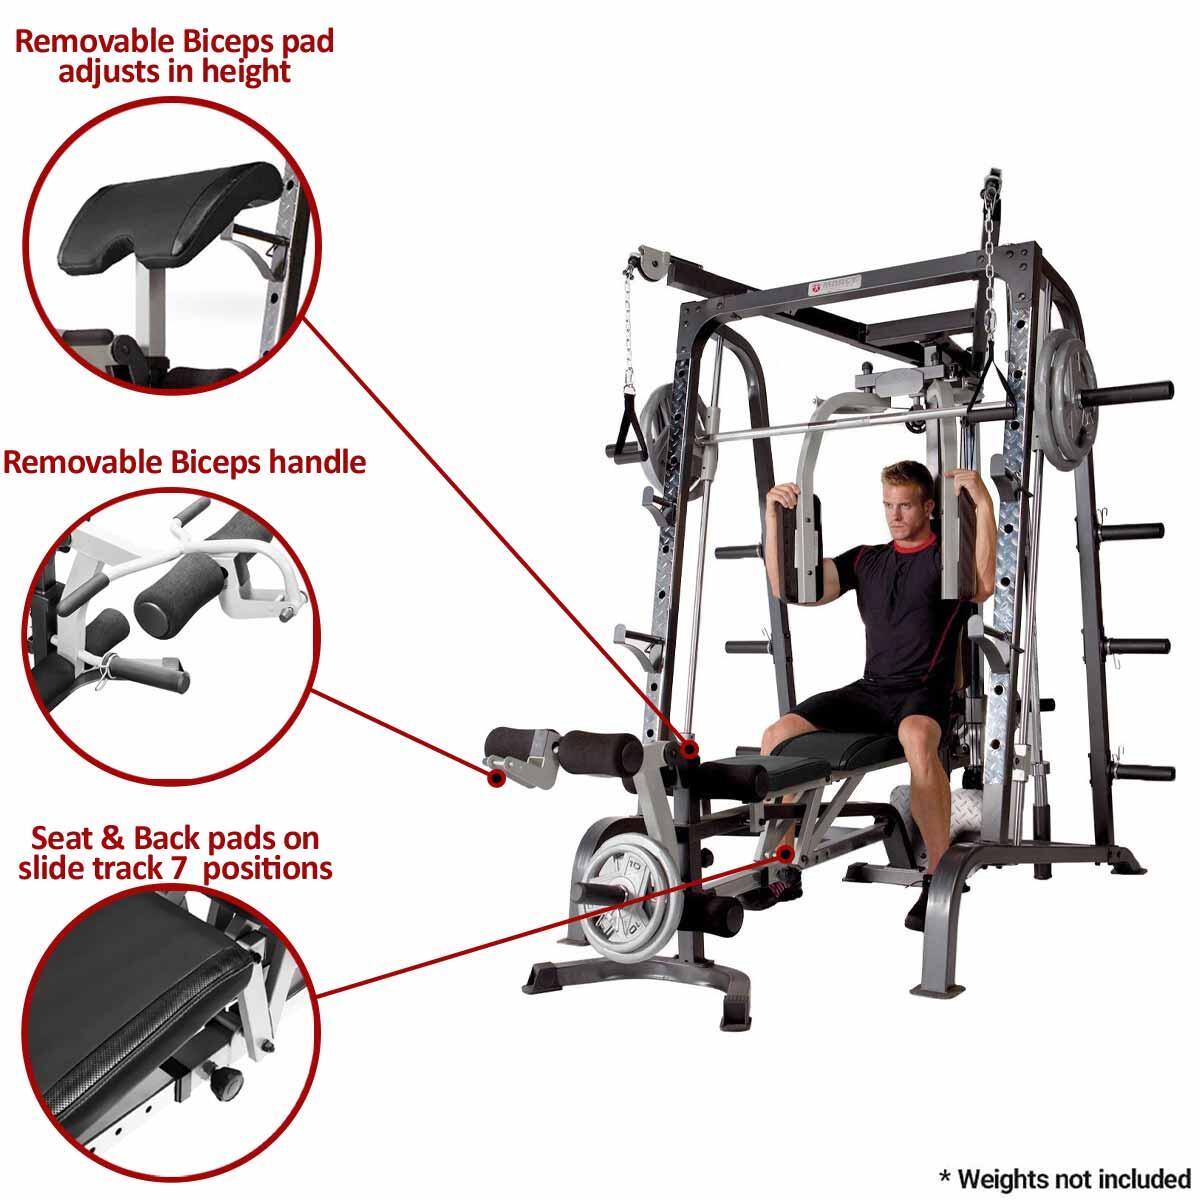 MARCY MD9010G DIAMOND ELITE DELUXE SMITH MACHINE WITH WEIGHT BENCH 4/8